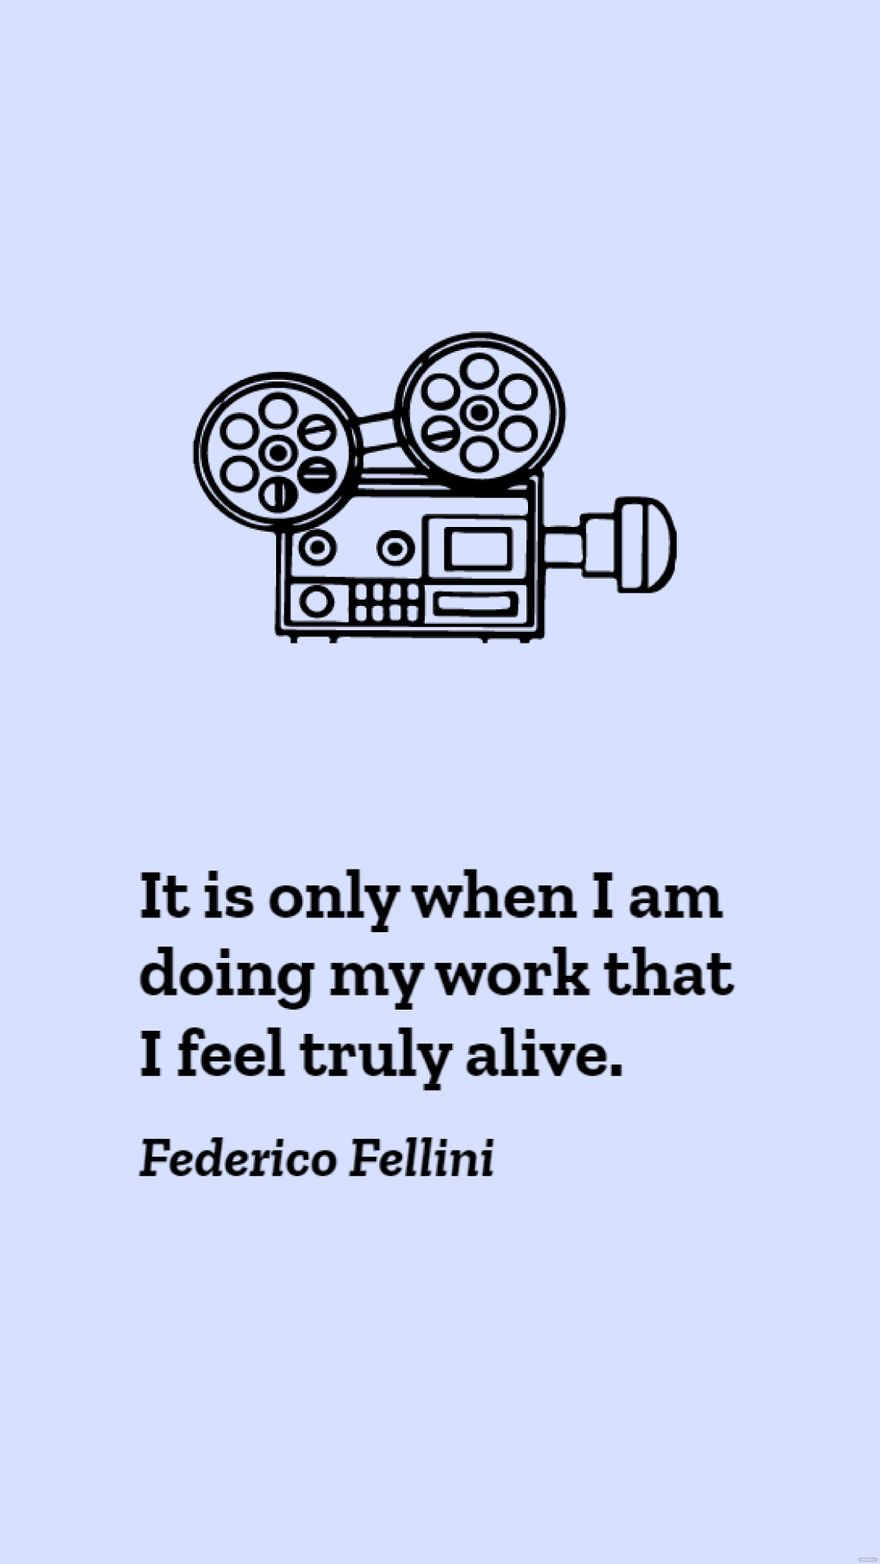 Federico Fellini - It is only when I am doing my work that I feel truly alive.